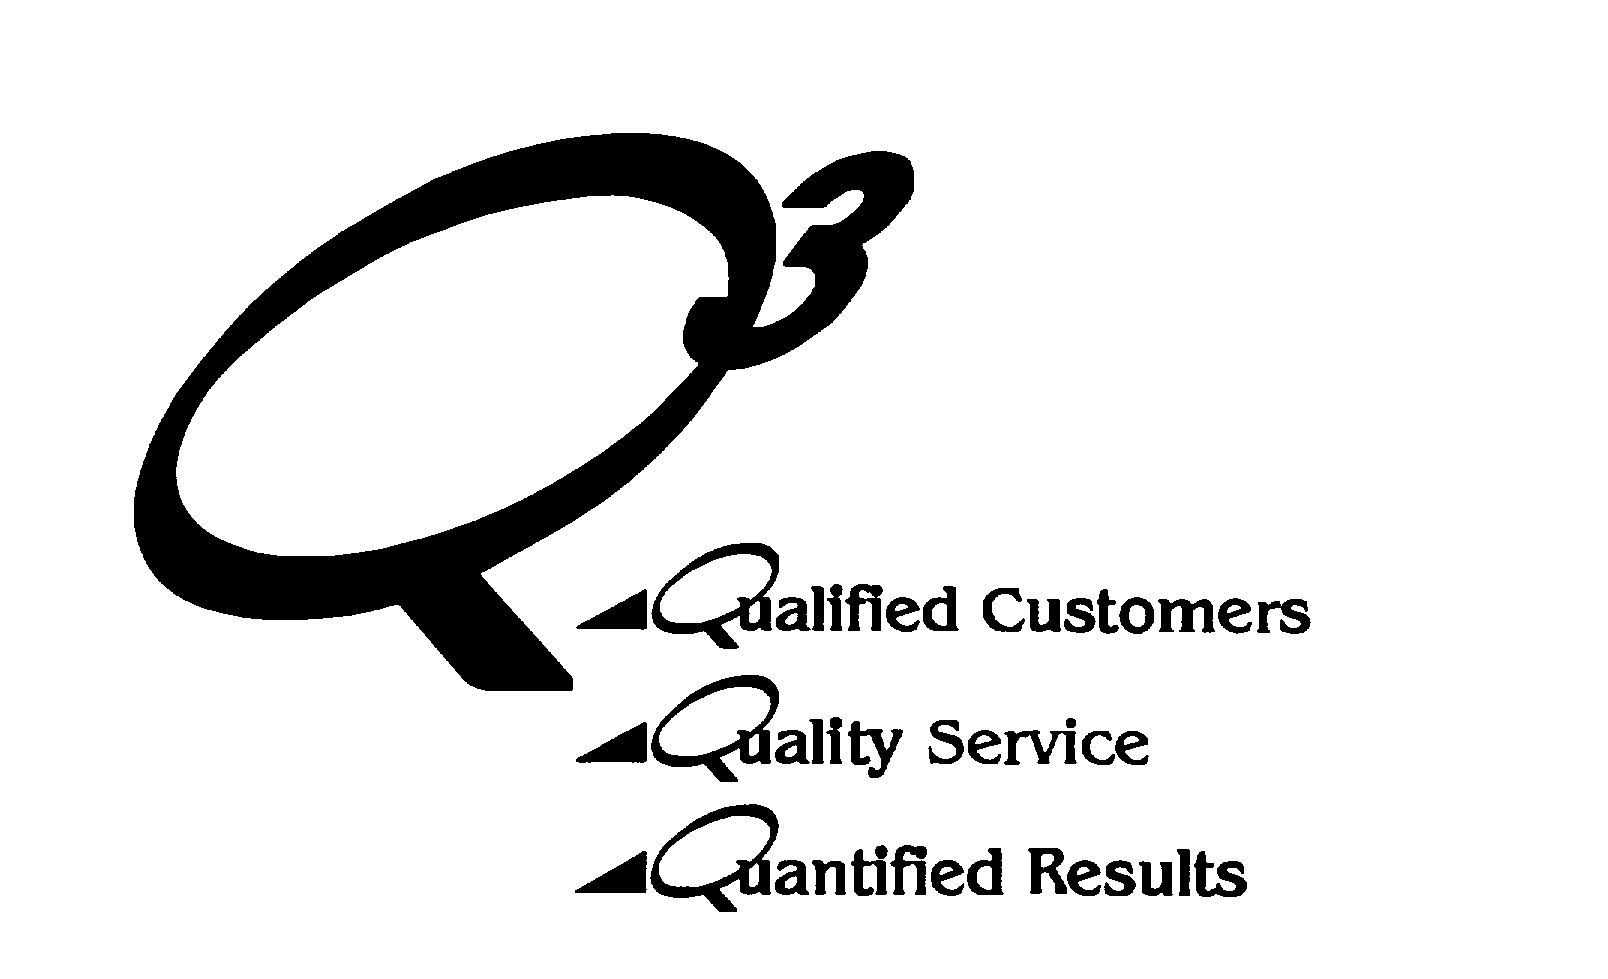  Q3 QUALIFIED CUSTOMERS QUALITY SERVICE QUANTIFIED RESULTS